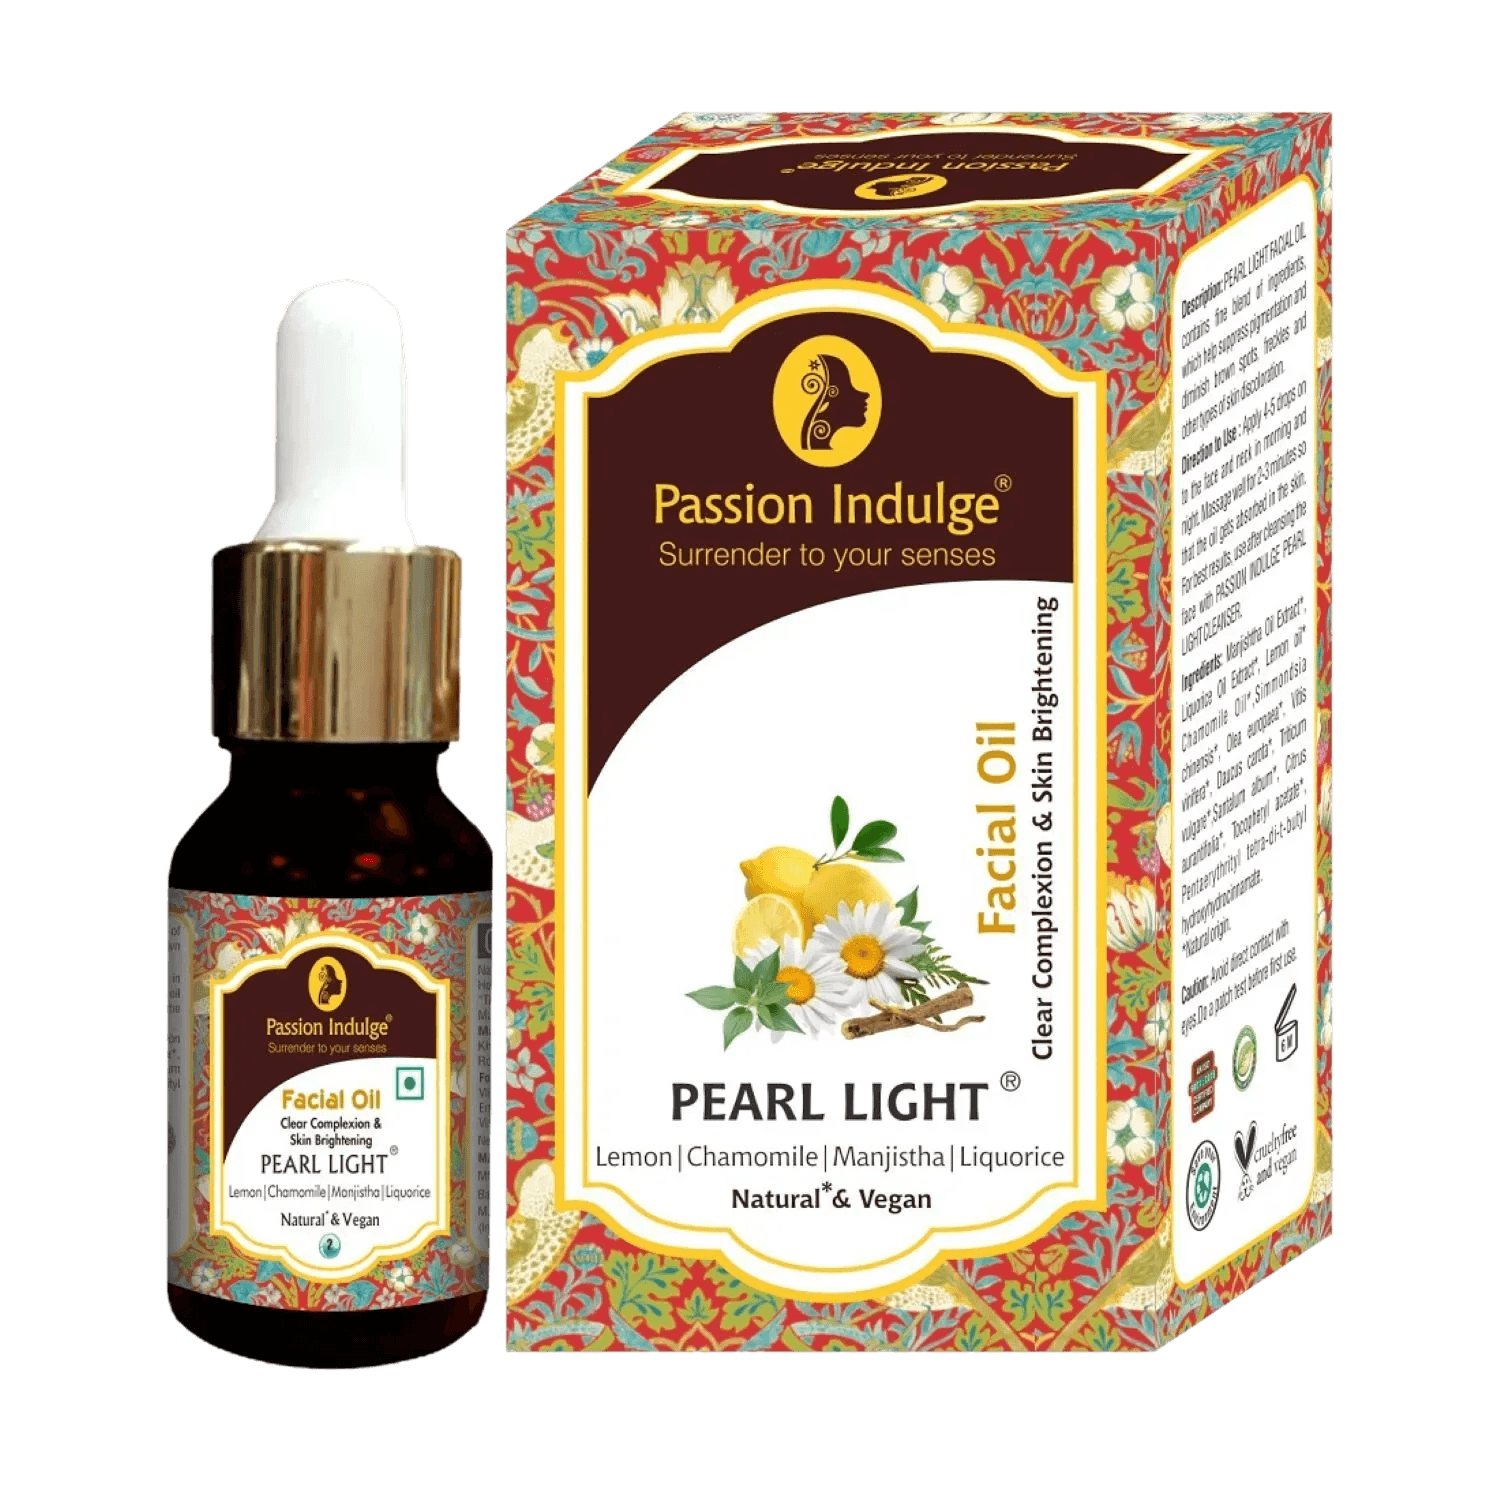 Passion Indulge | Passion Indulge Skin Brightening & Spot Reduction Pearl Light Facial Oil (10 ml)